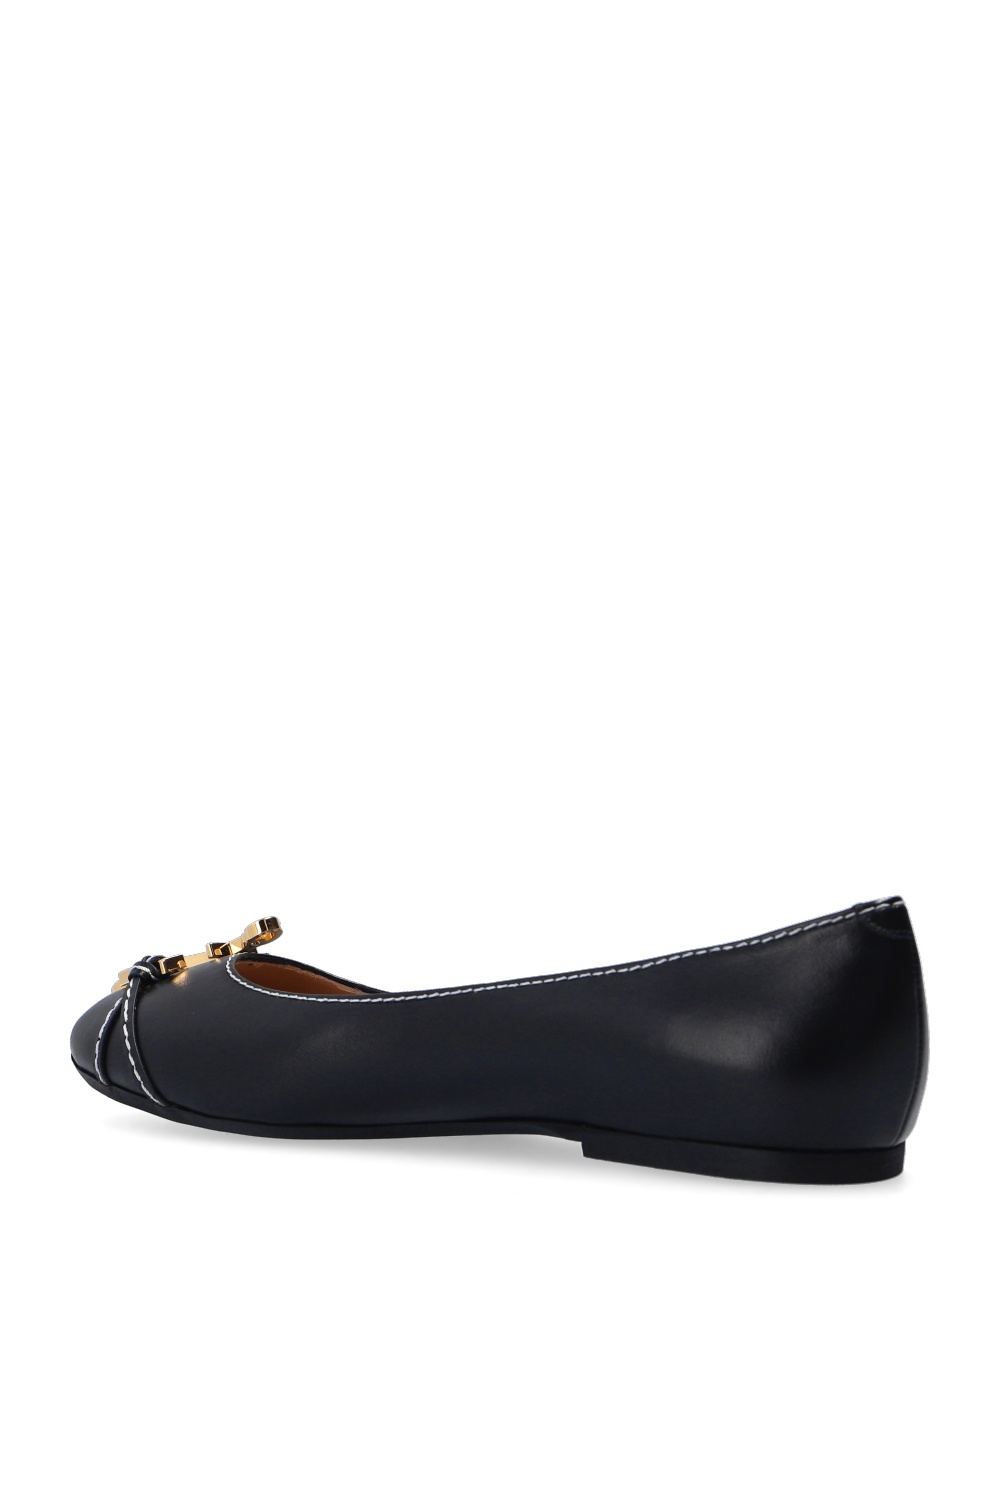 J.W. Anderson Ballet flats with logo